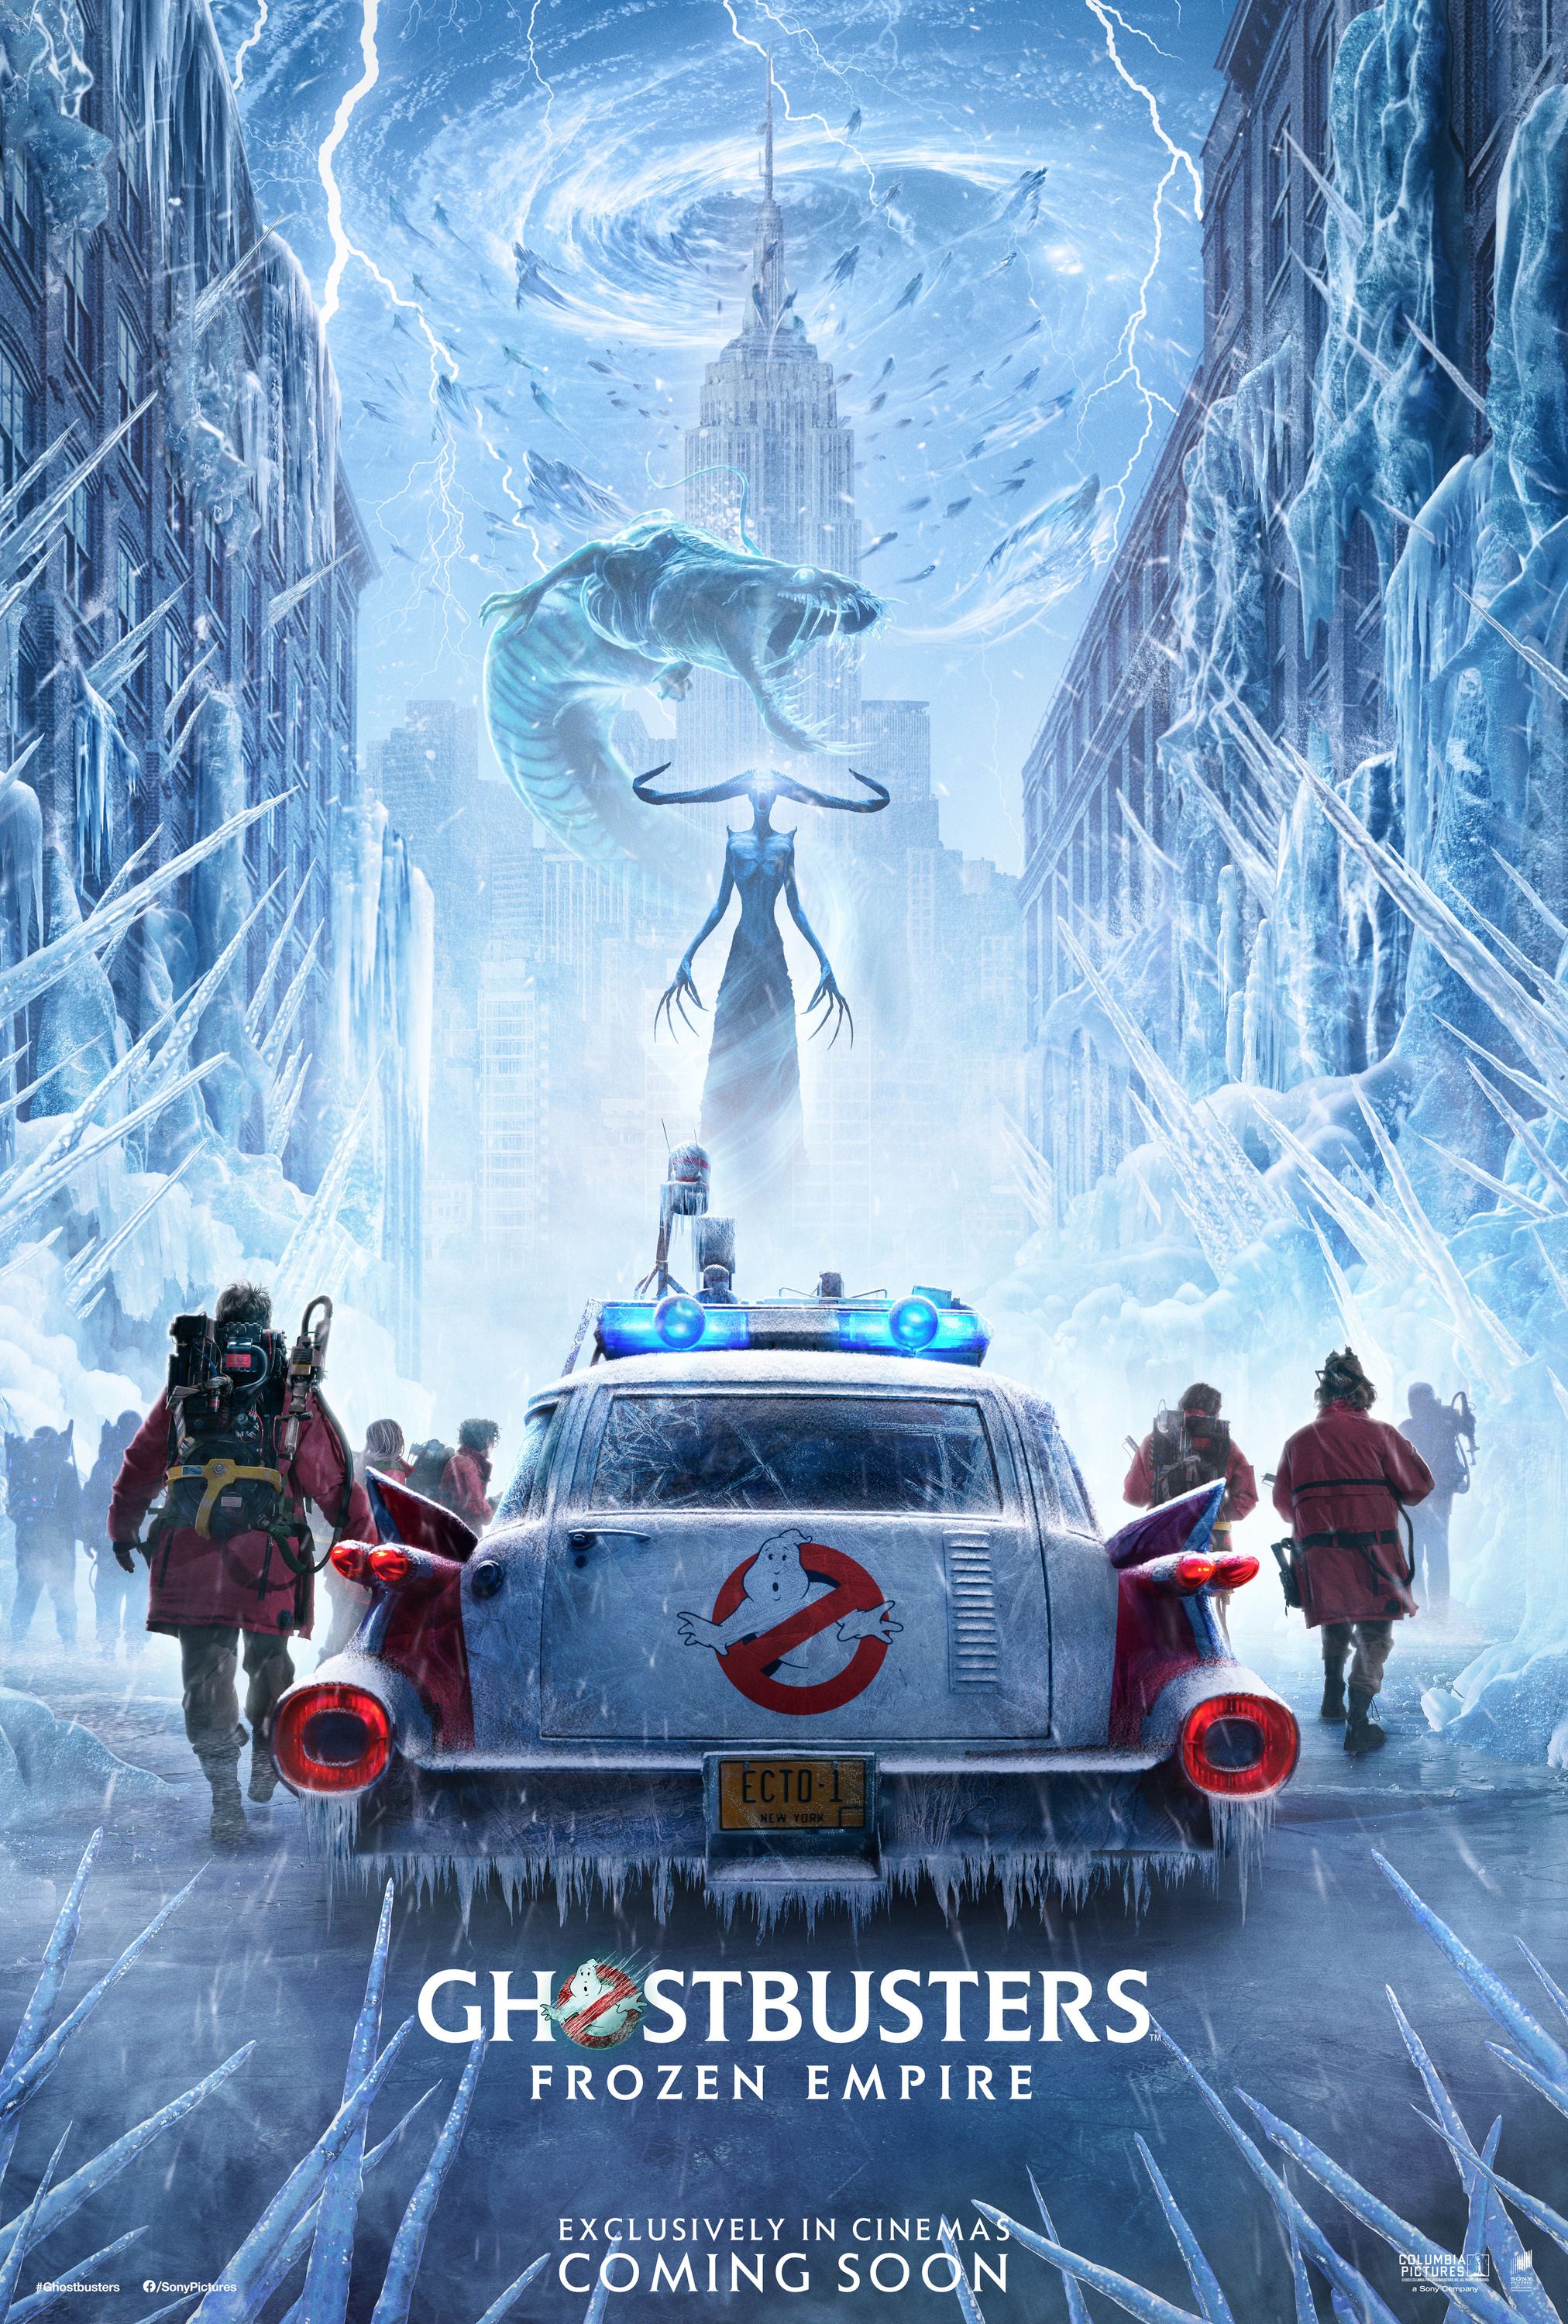 Ghostbusters Frozen Empire New Film Poster